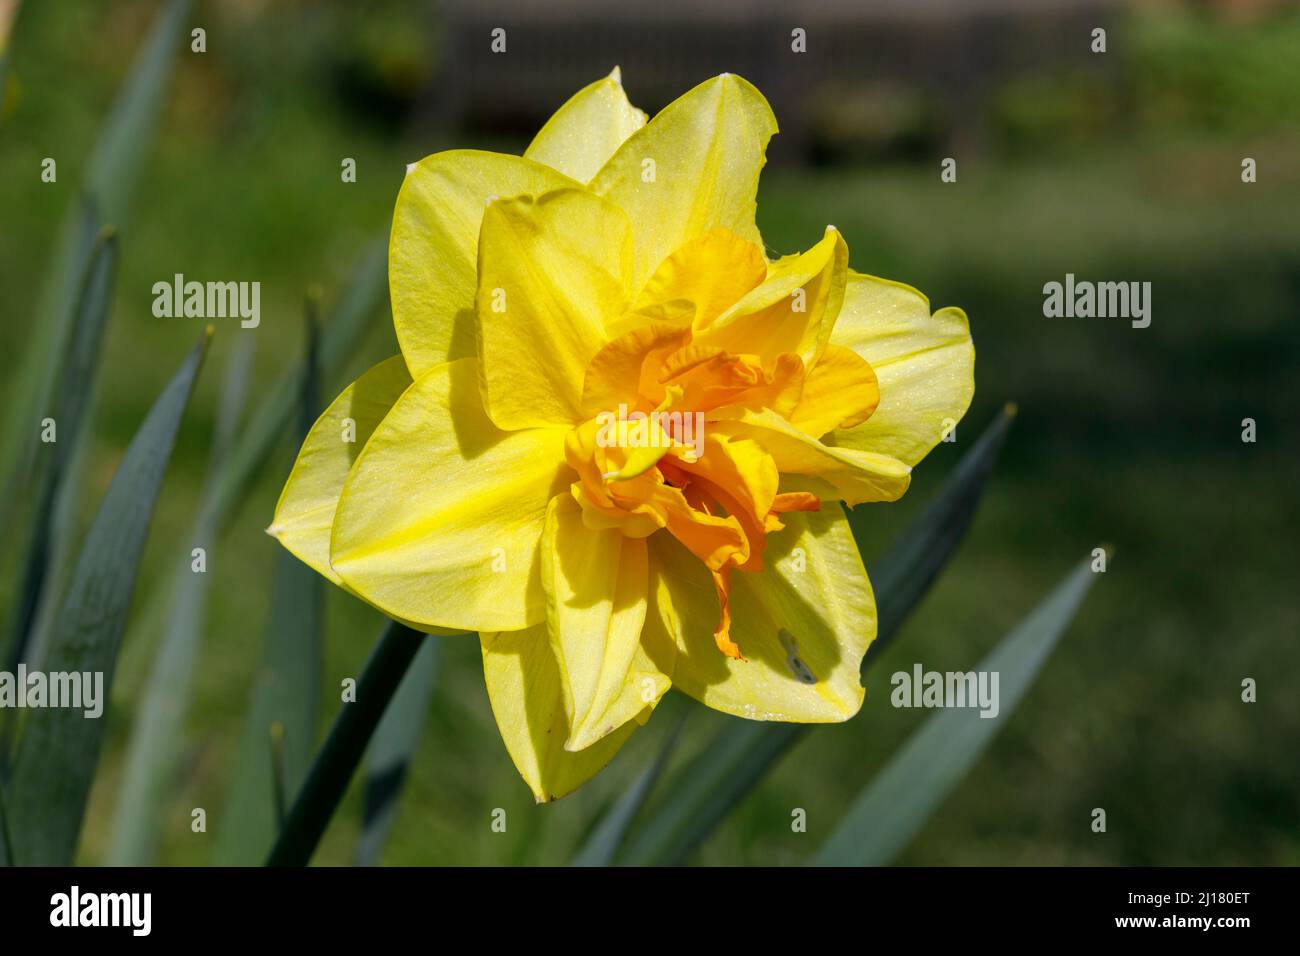 Double flowering Daffodil plant showing 2 rings of yellow petals. Stock Photo